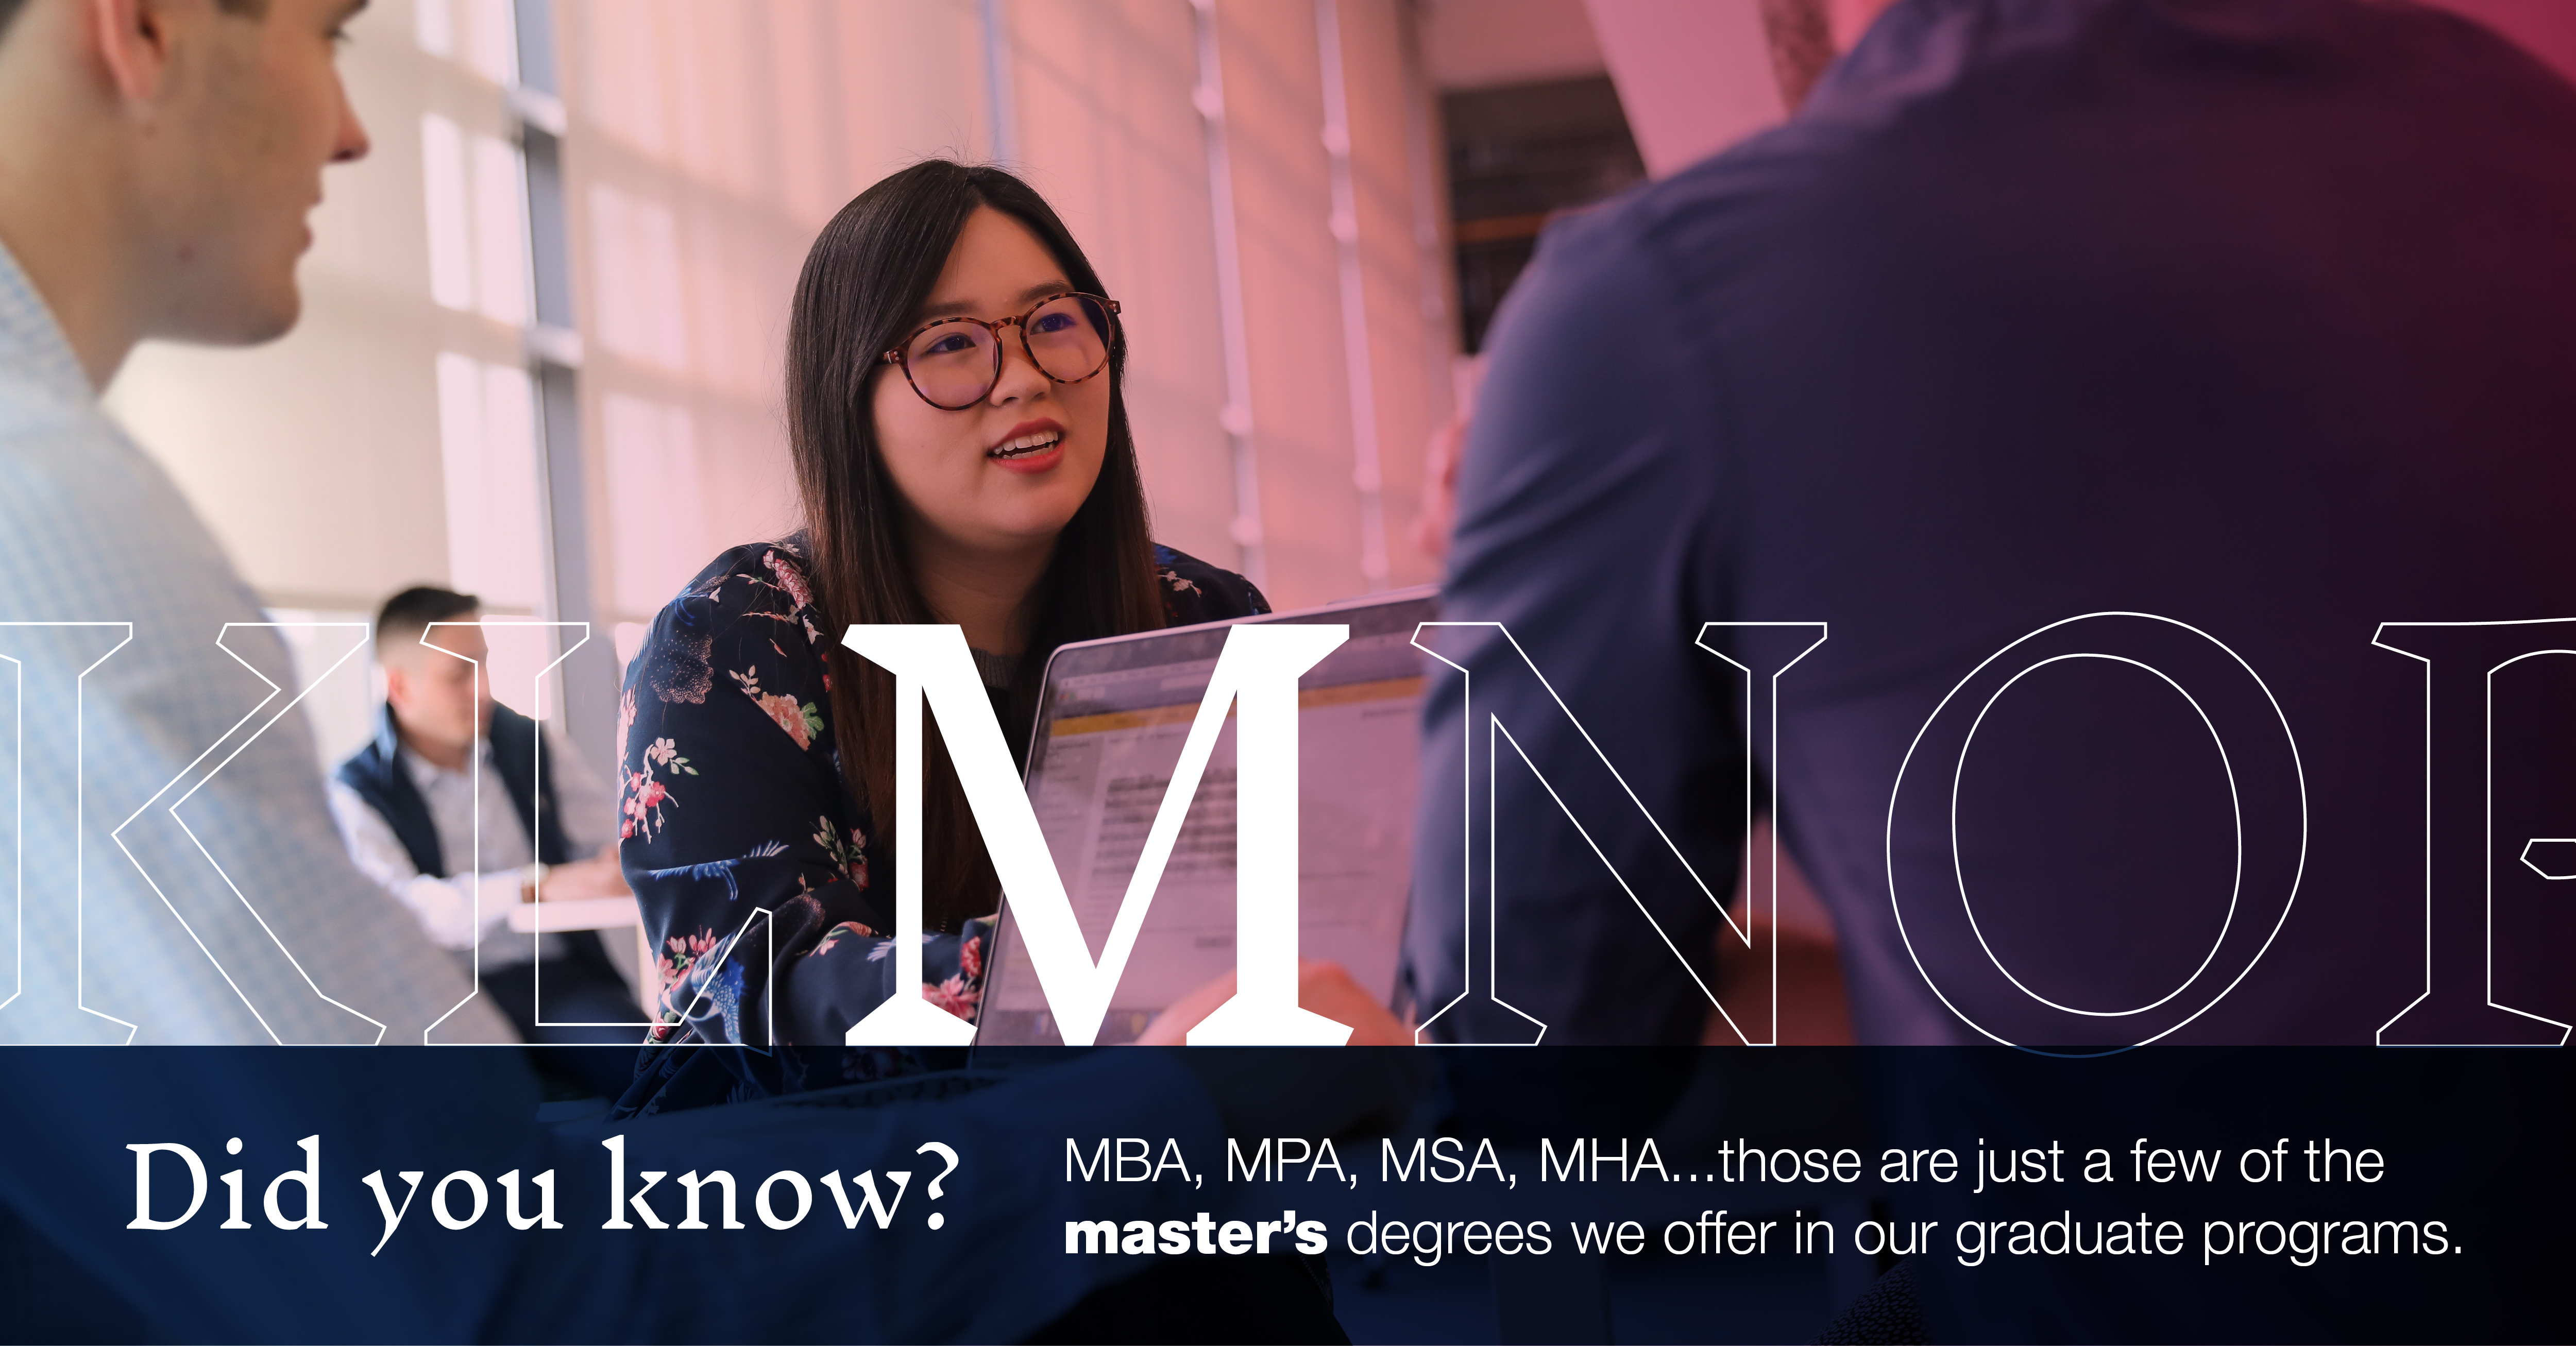 M: [image of graduate students in a study group]: MBA, MPA, MSA, MHA...did you know those are just a few of the master's degrees we offer in our graduate programs?